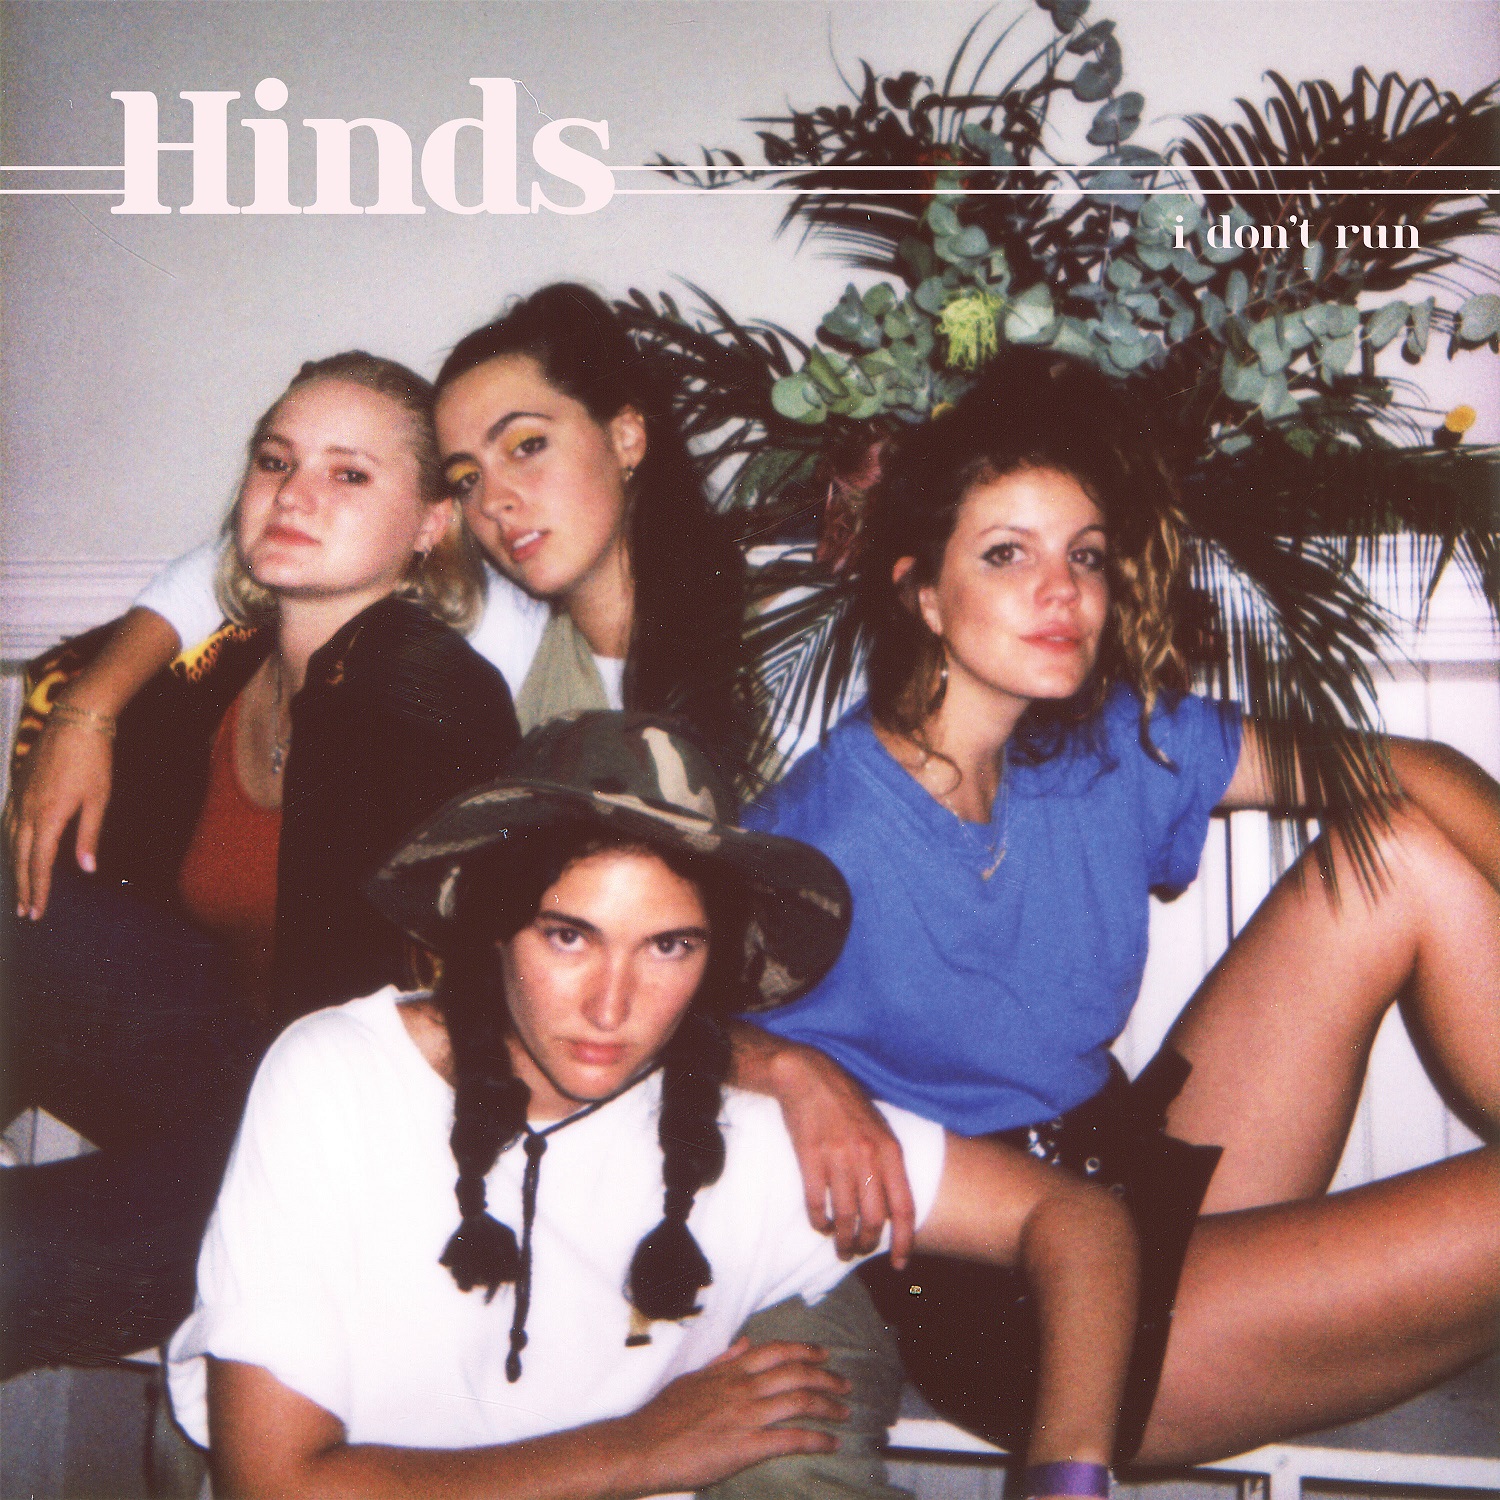 the hinds tour